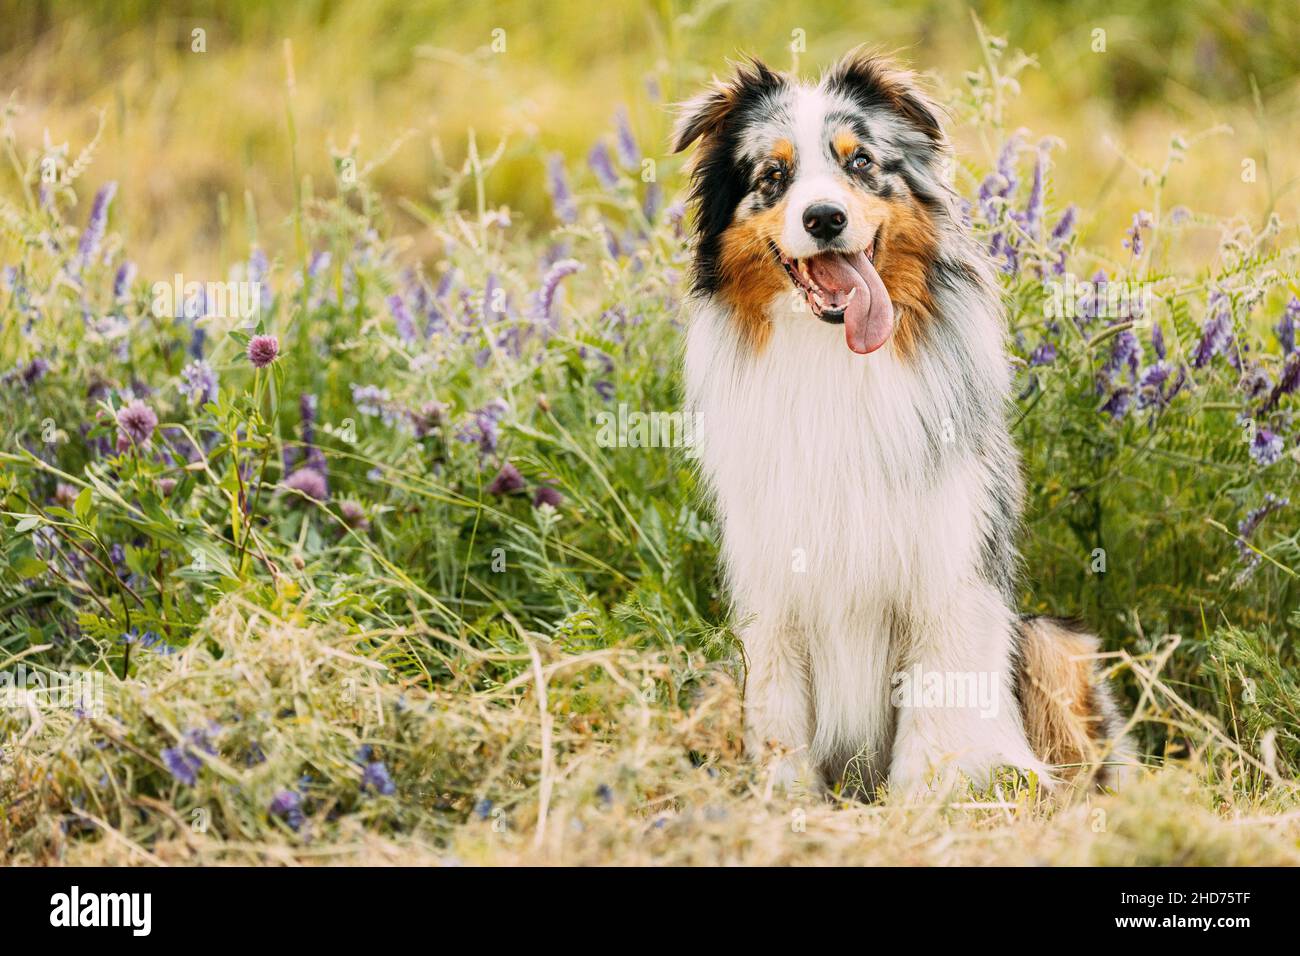 Funny Red And White Australian Shepherd Dog Sitting In Green Grass With Purple Blooming Flowers. Aussie Is A Medium-sized Breed Of Dog That Was Stock Photo